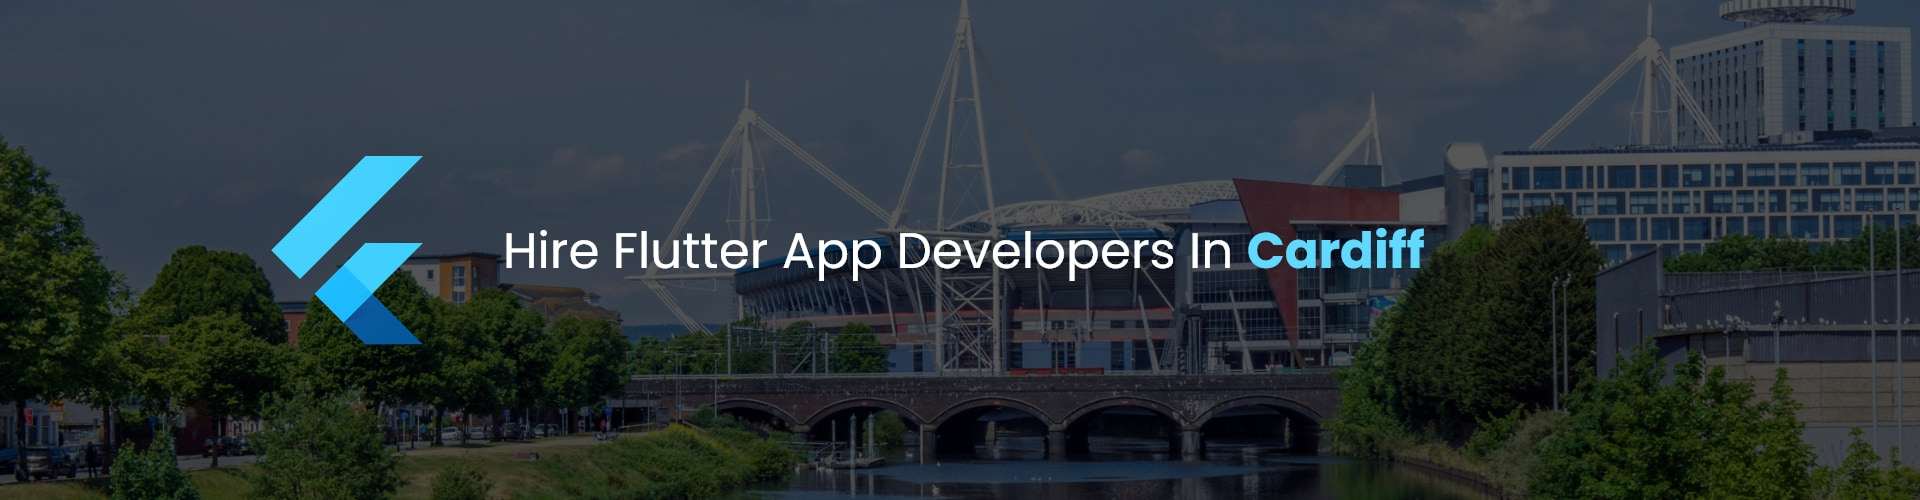 hire flutter app developers in cardiff